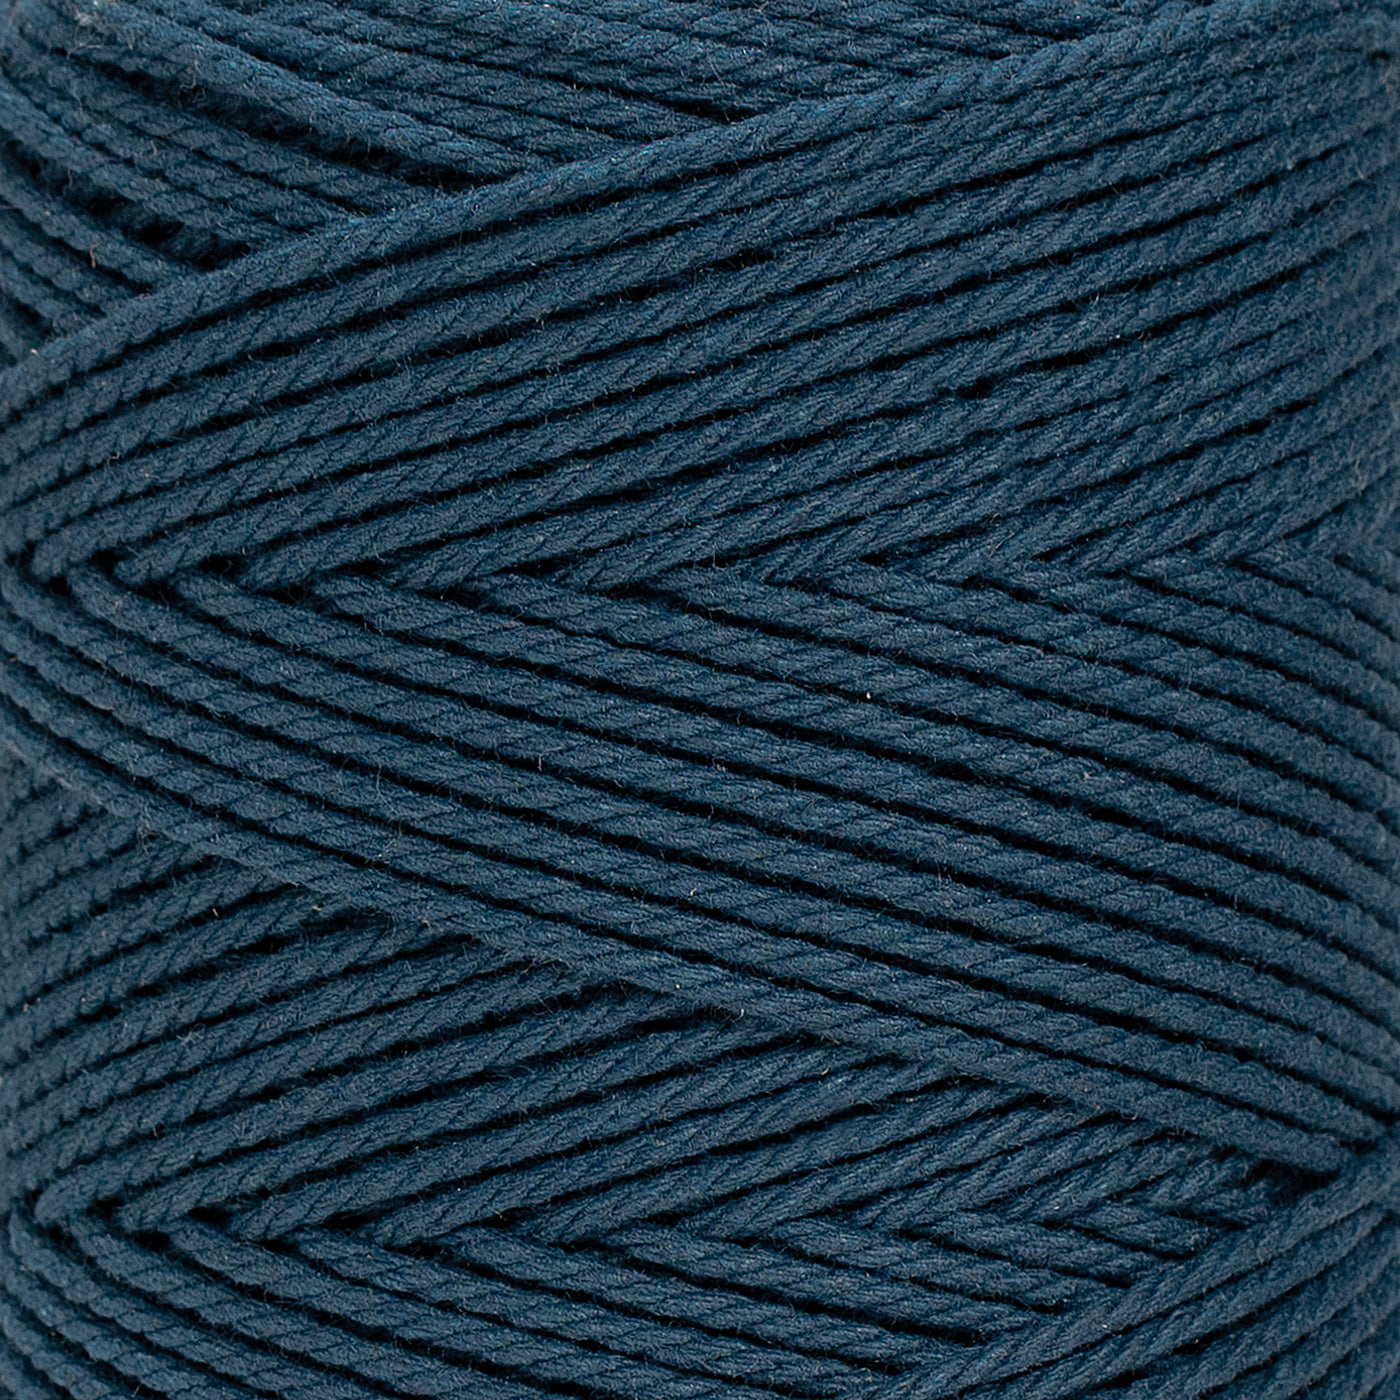 COTTON ROPE ZERO WASTE 2 MM - 3 PLY - PEACOCK BLUE COLOR